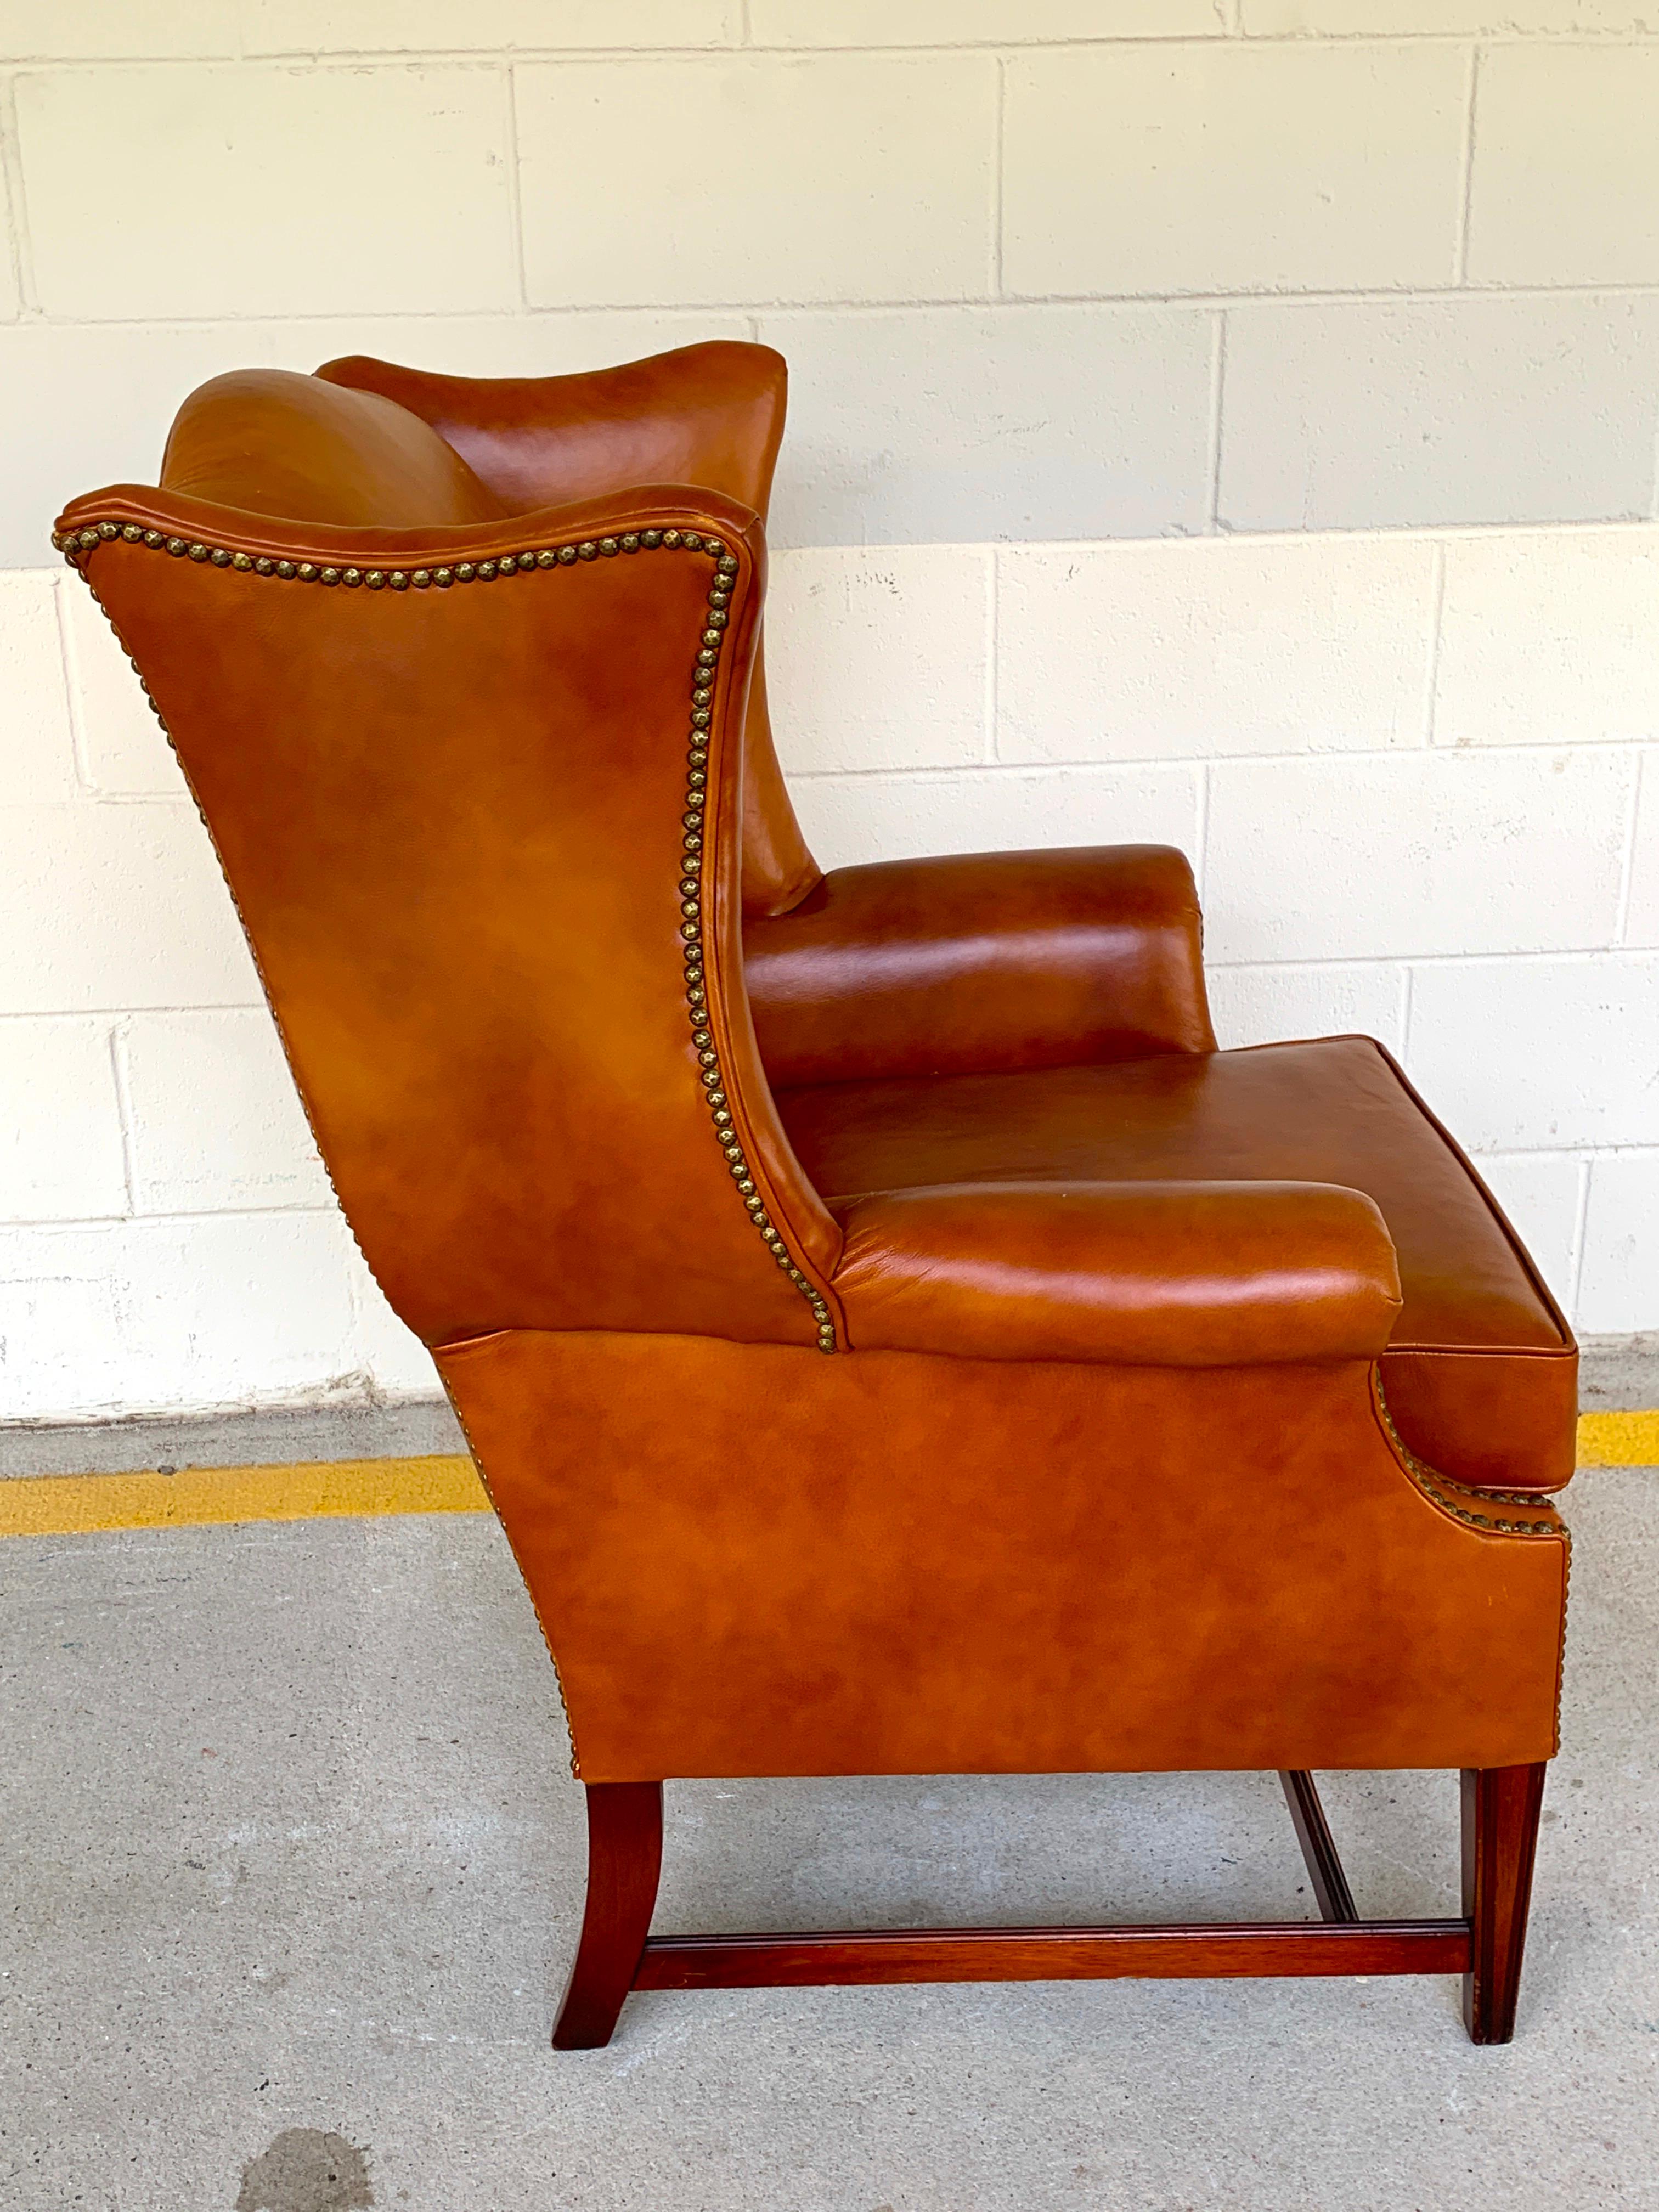 English Saddle Leather Mahogany Wingback Chair For Sale 1